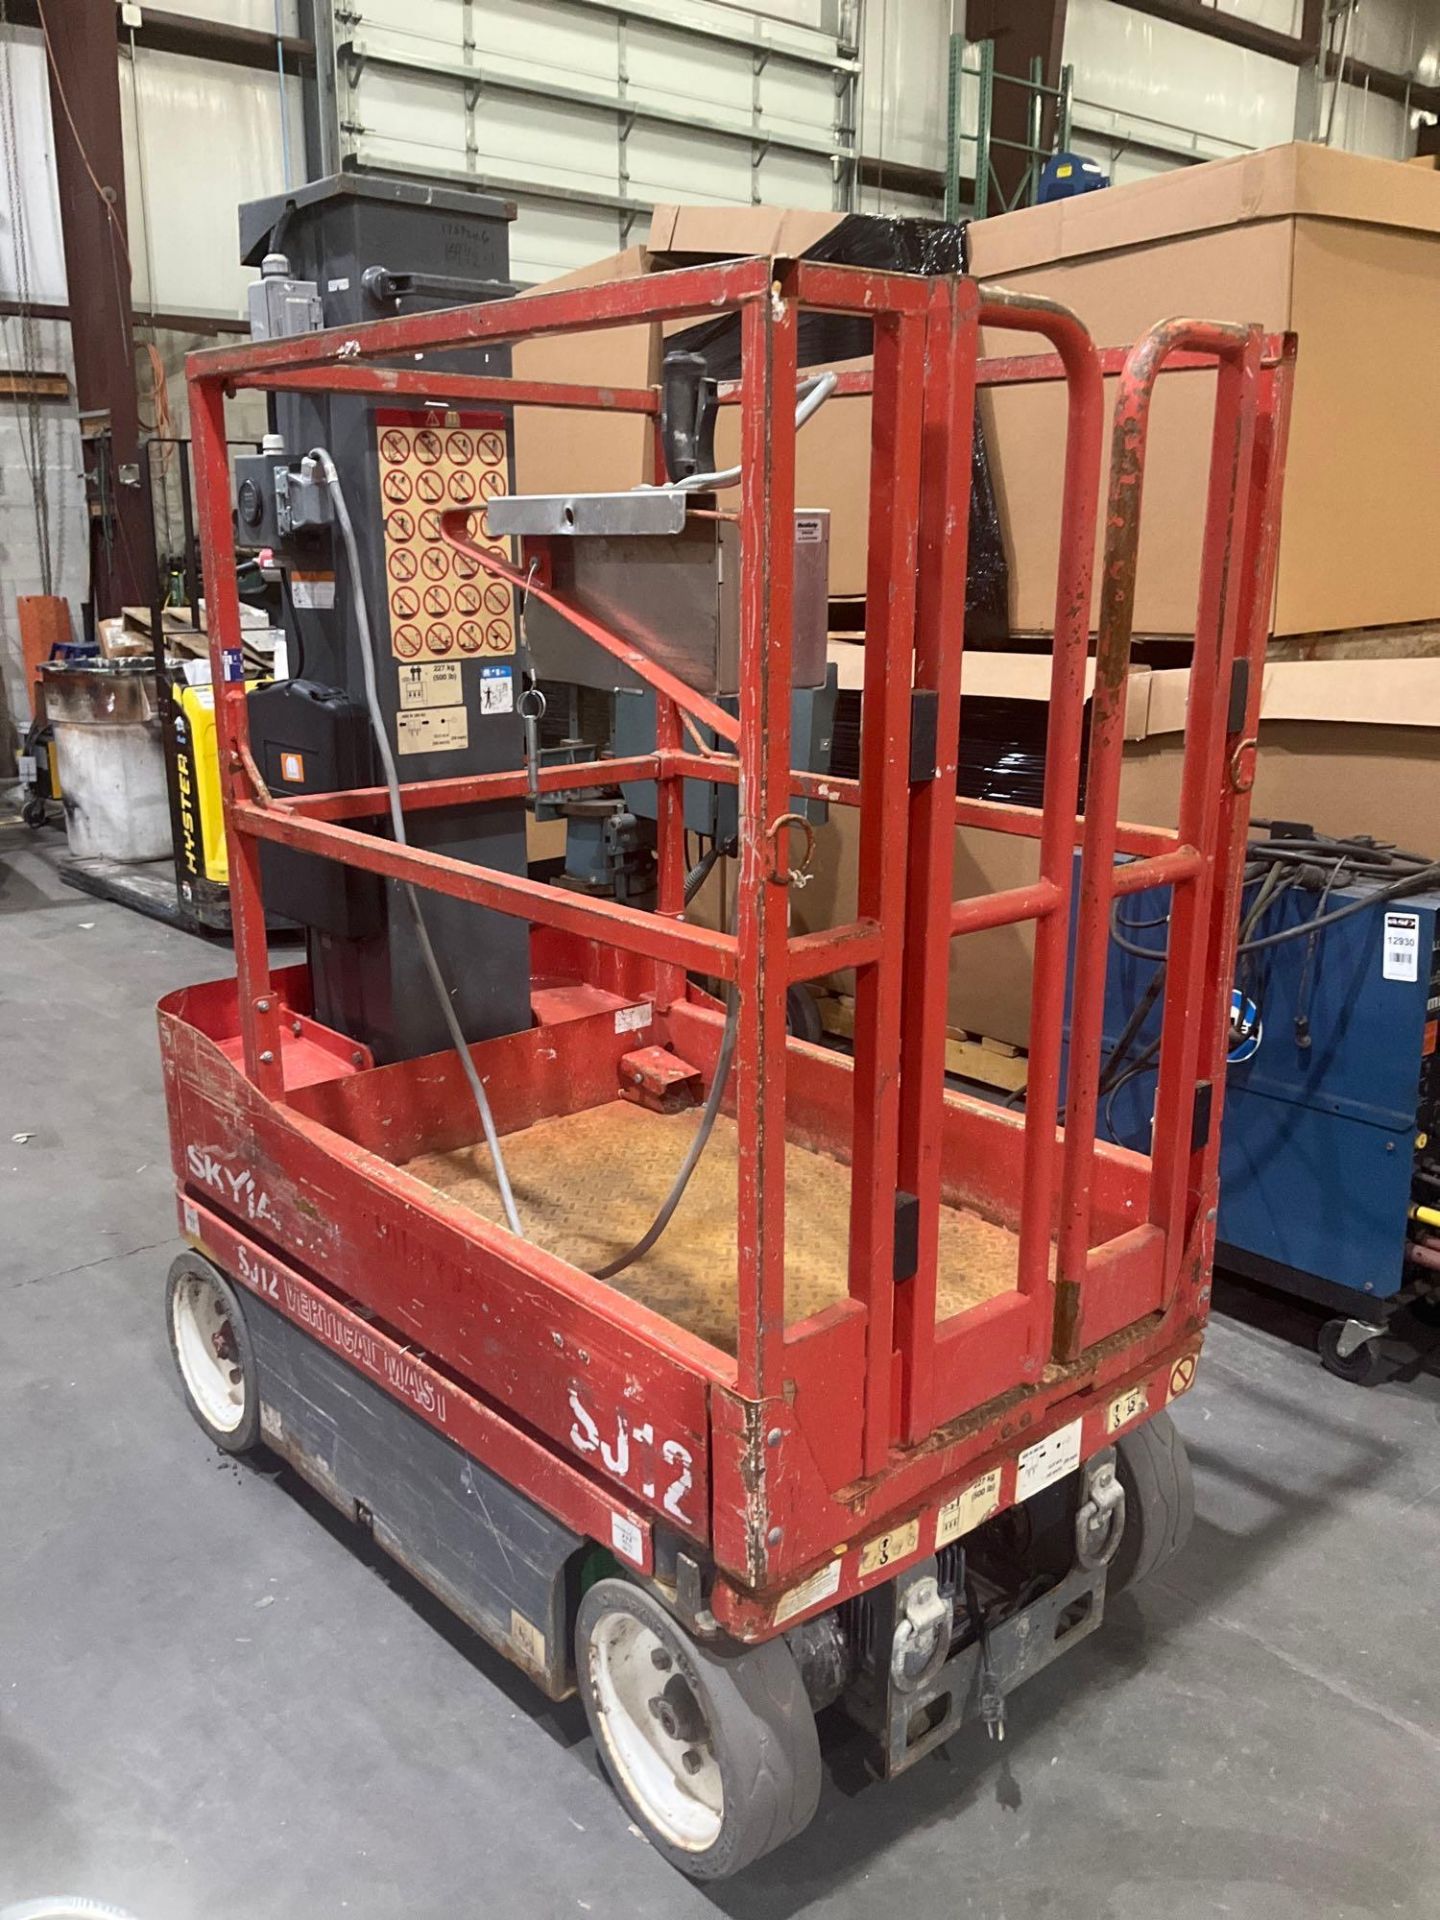 SKYJACK MANLIFT MODEL SJ12, ELECTRIC, APPROX MAX PLATFORM HEIGHT 12FT, NON MARKING TIRES, BUILT IN B